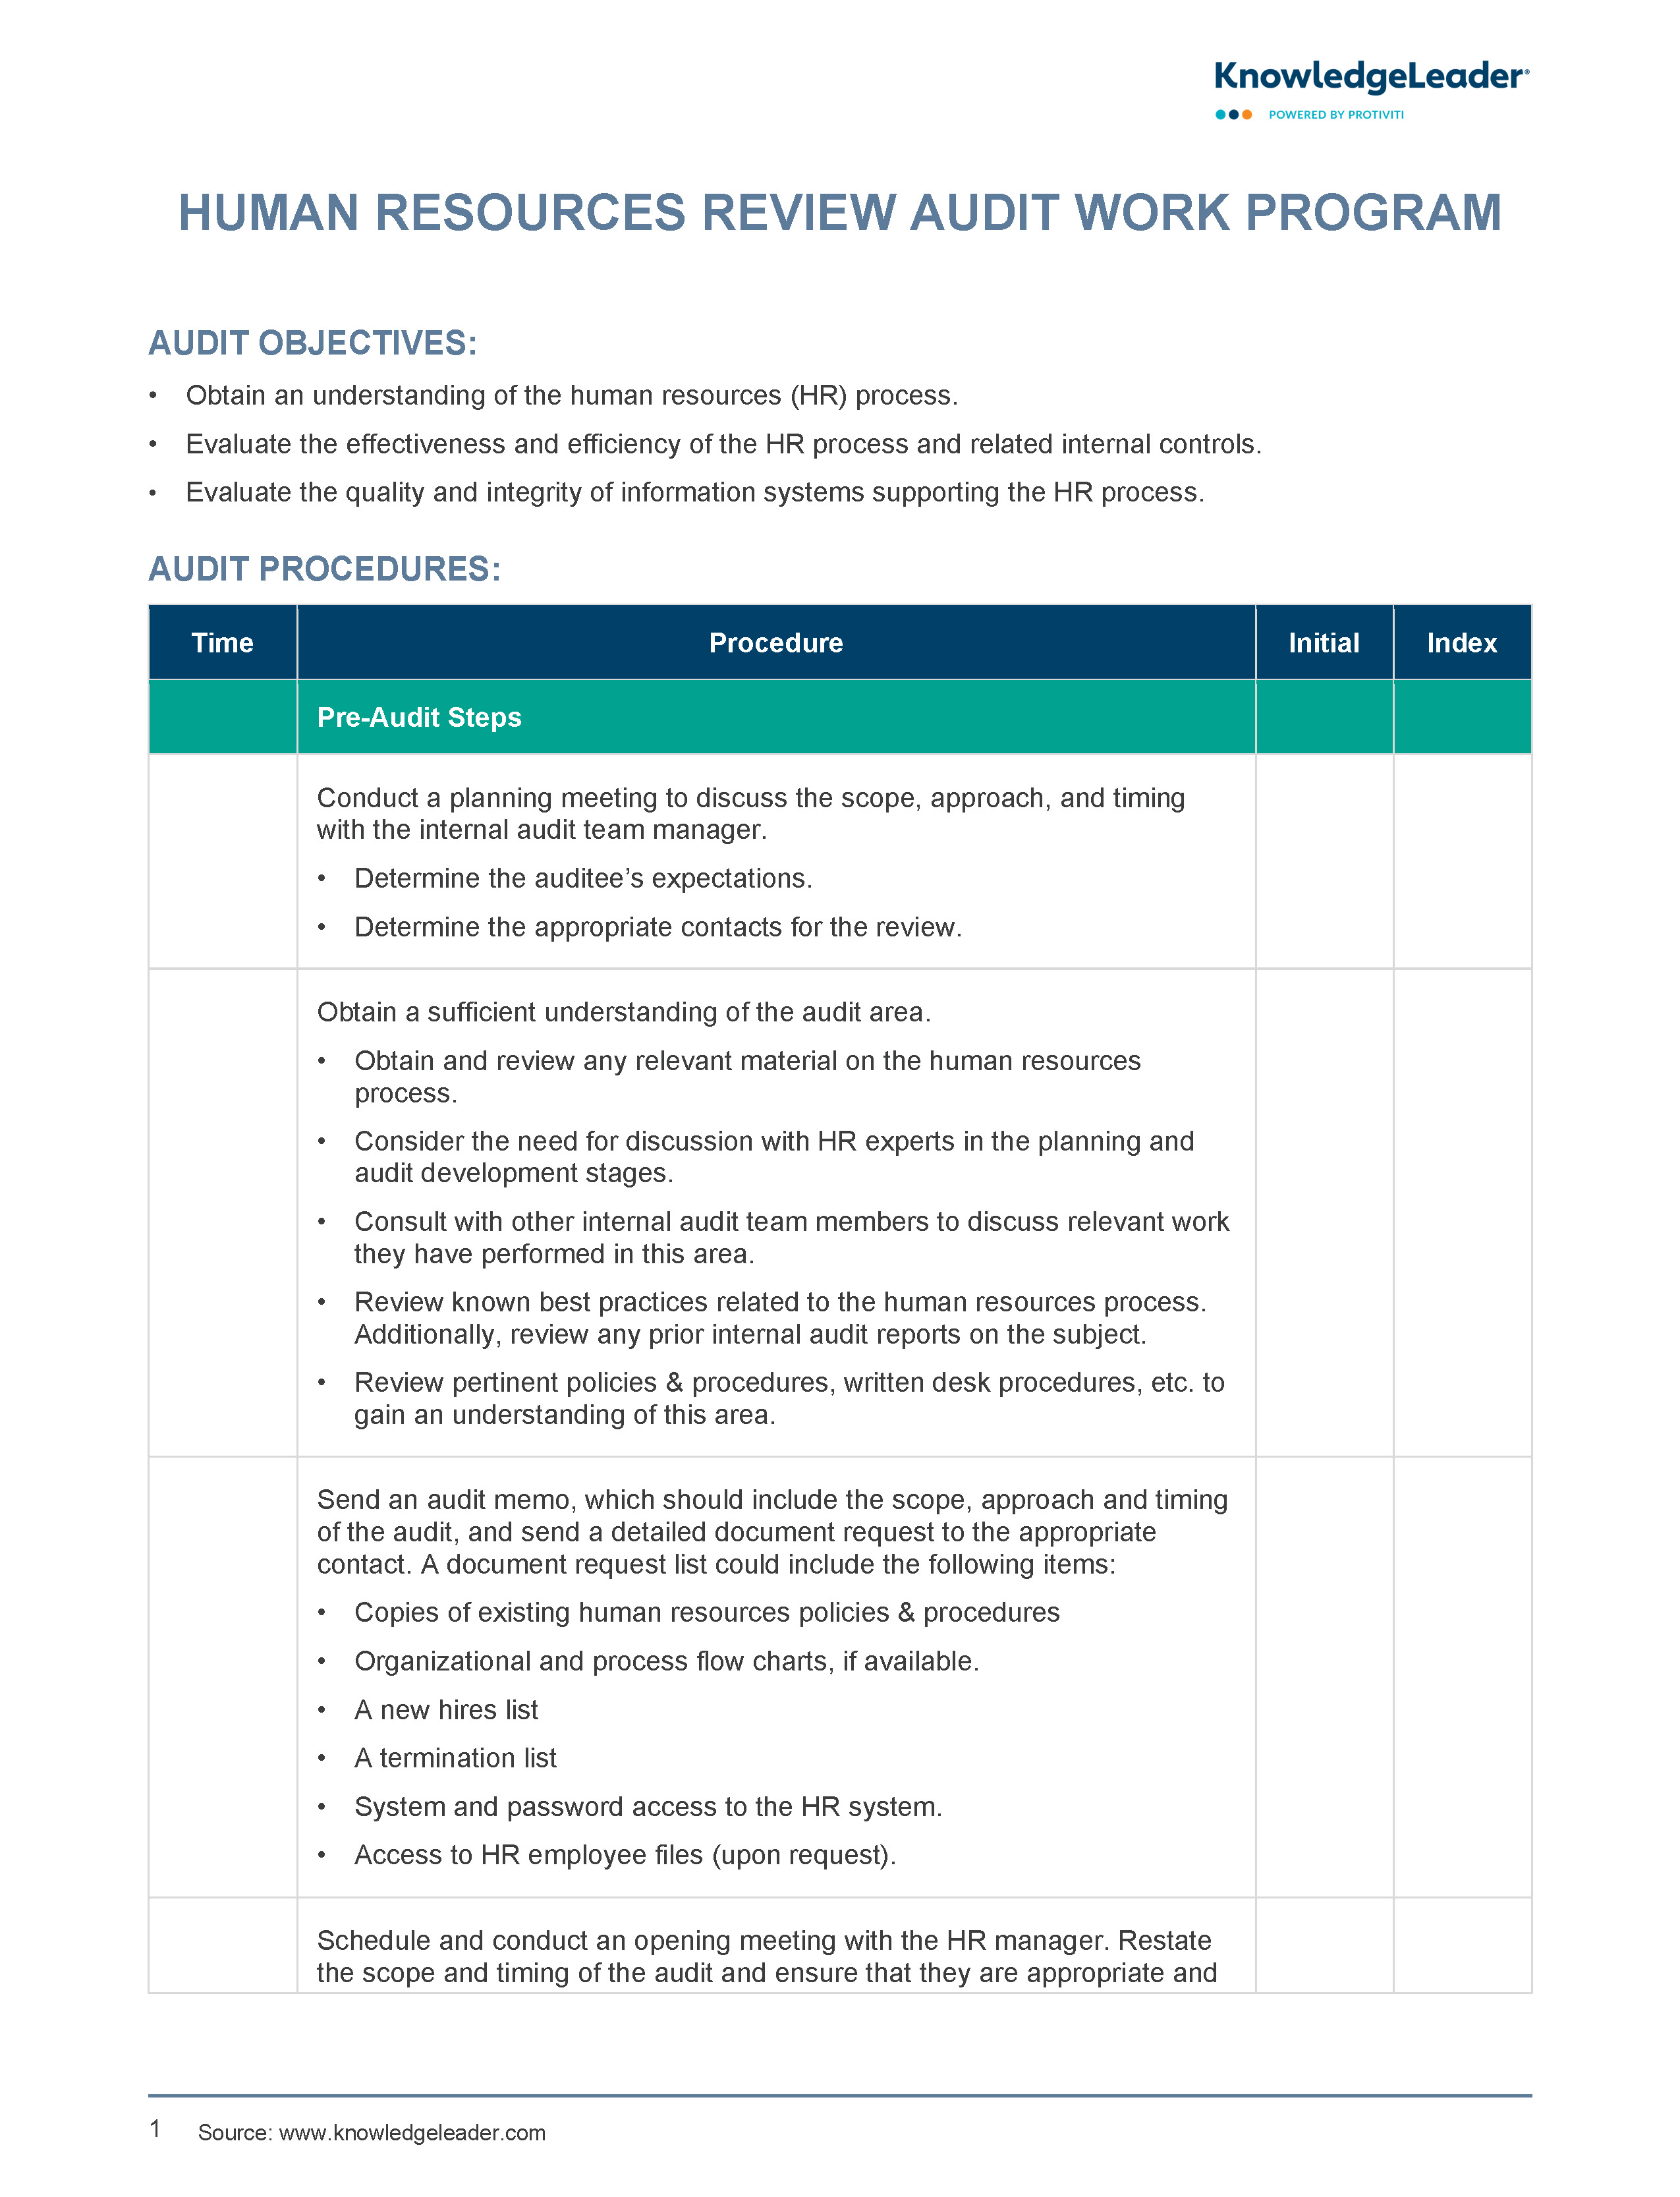 screenshot of first page of Human Resources Review Audit Work Program